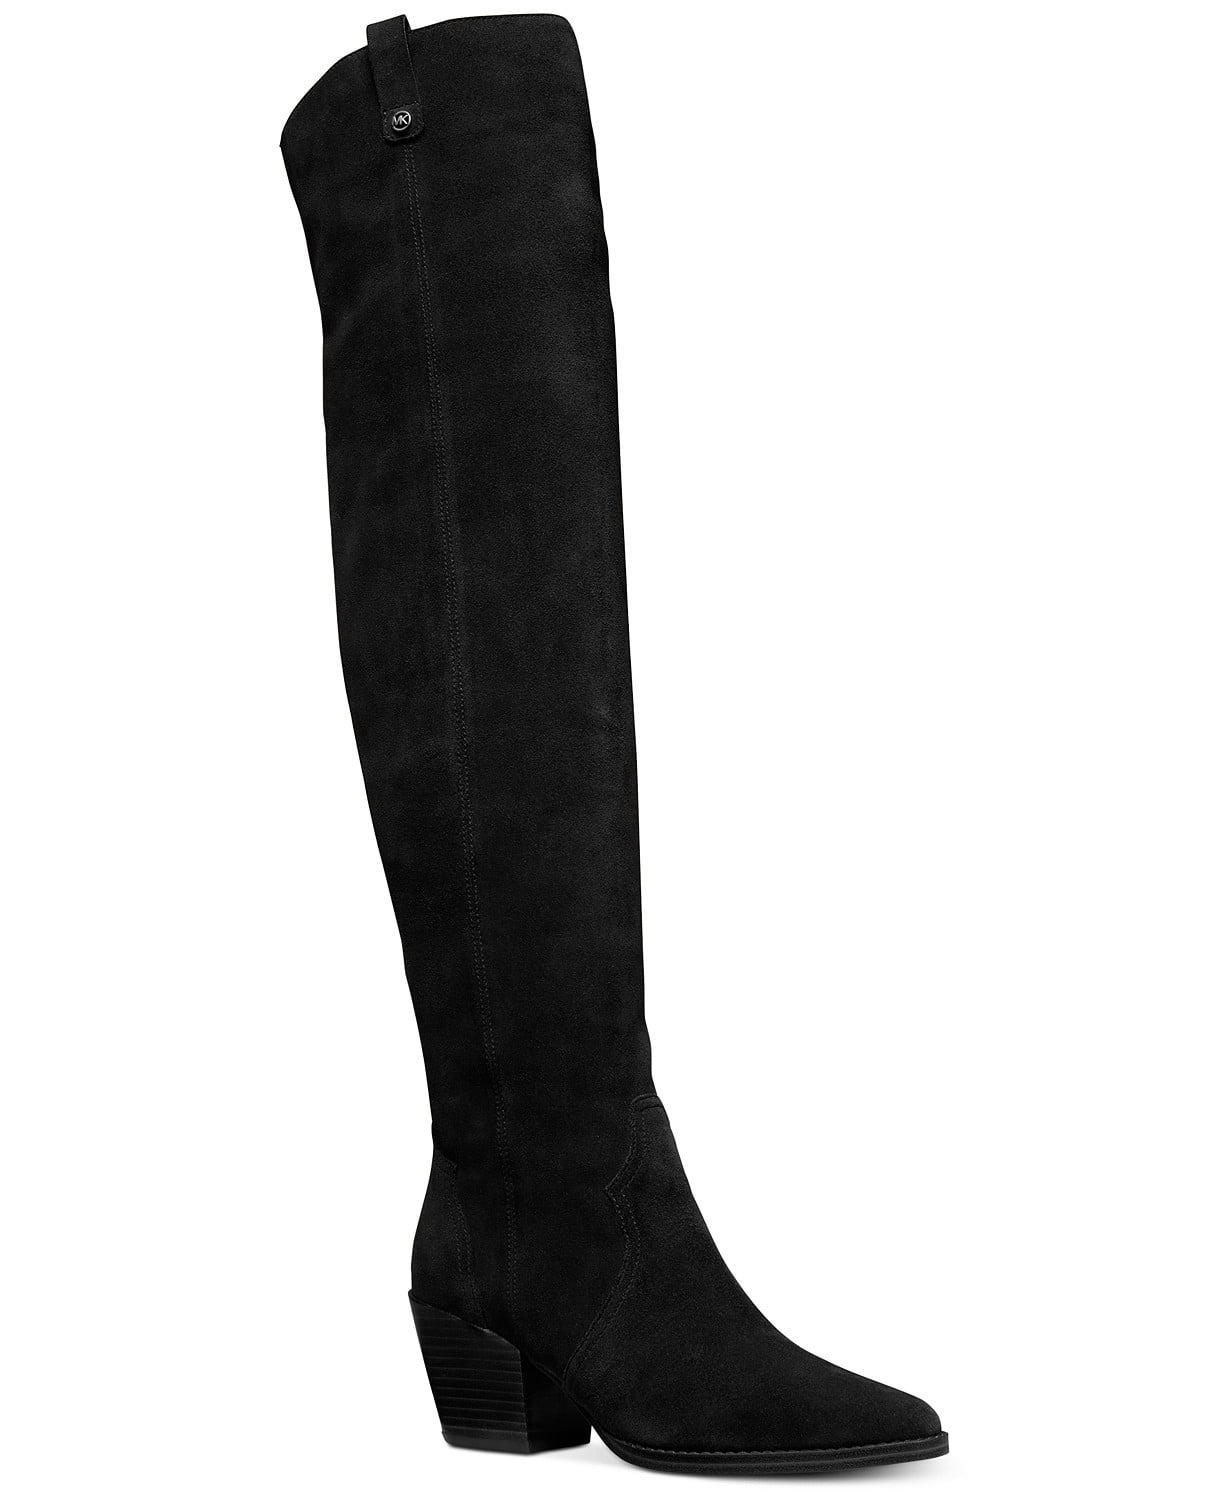 Michael Kors Bodkin Over-The-Knee Boots | Macy's Has 7,000+ Shoes Online,  but We Recommend These 31 Pairs For Fall | POPSUGAR Fashion Photo 31